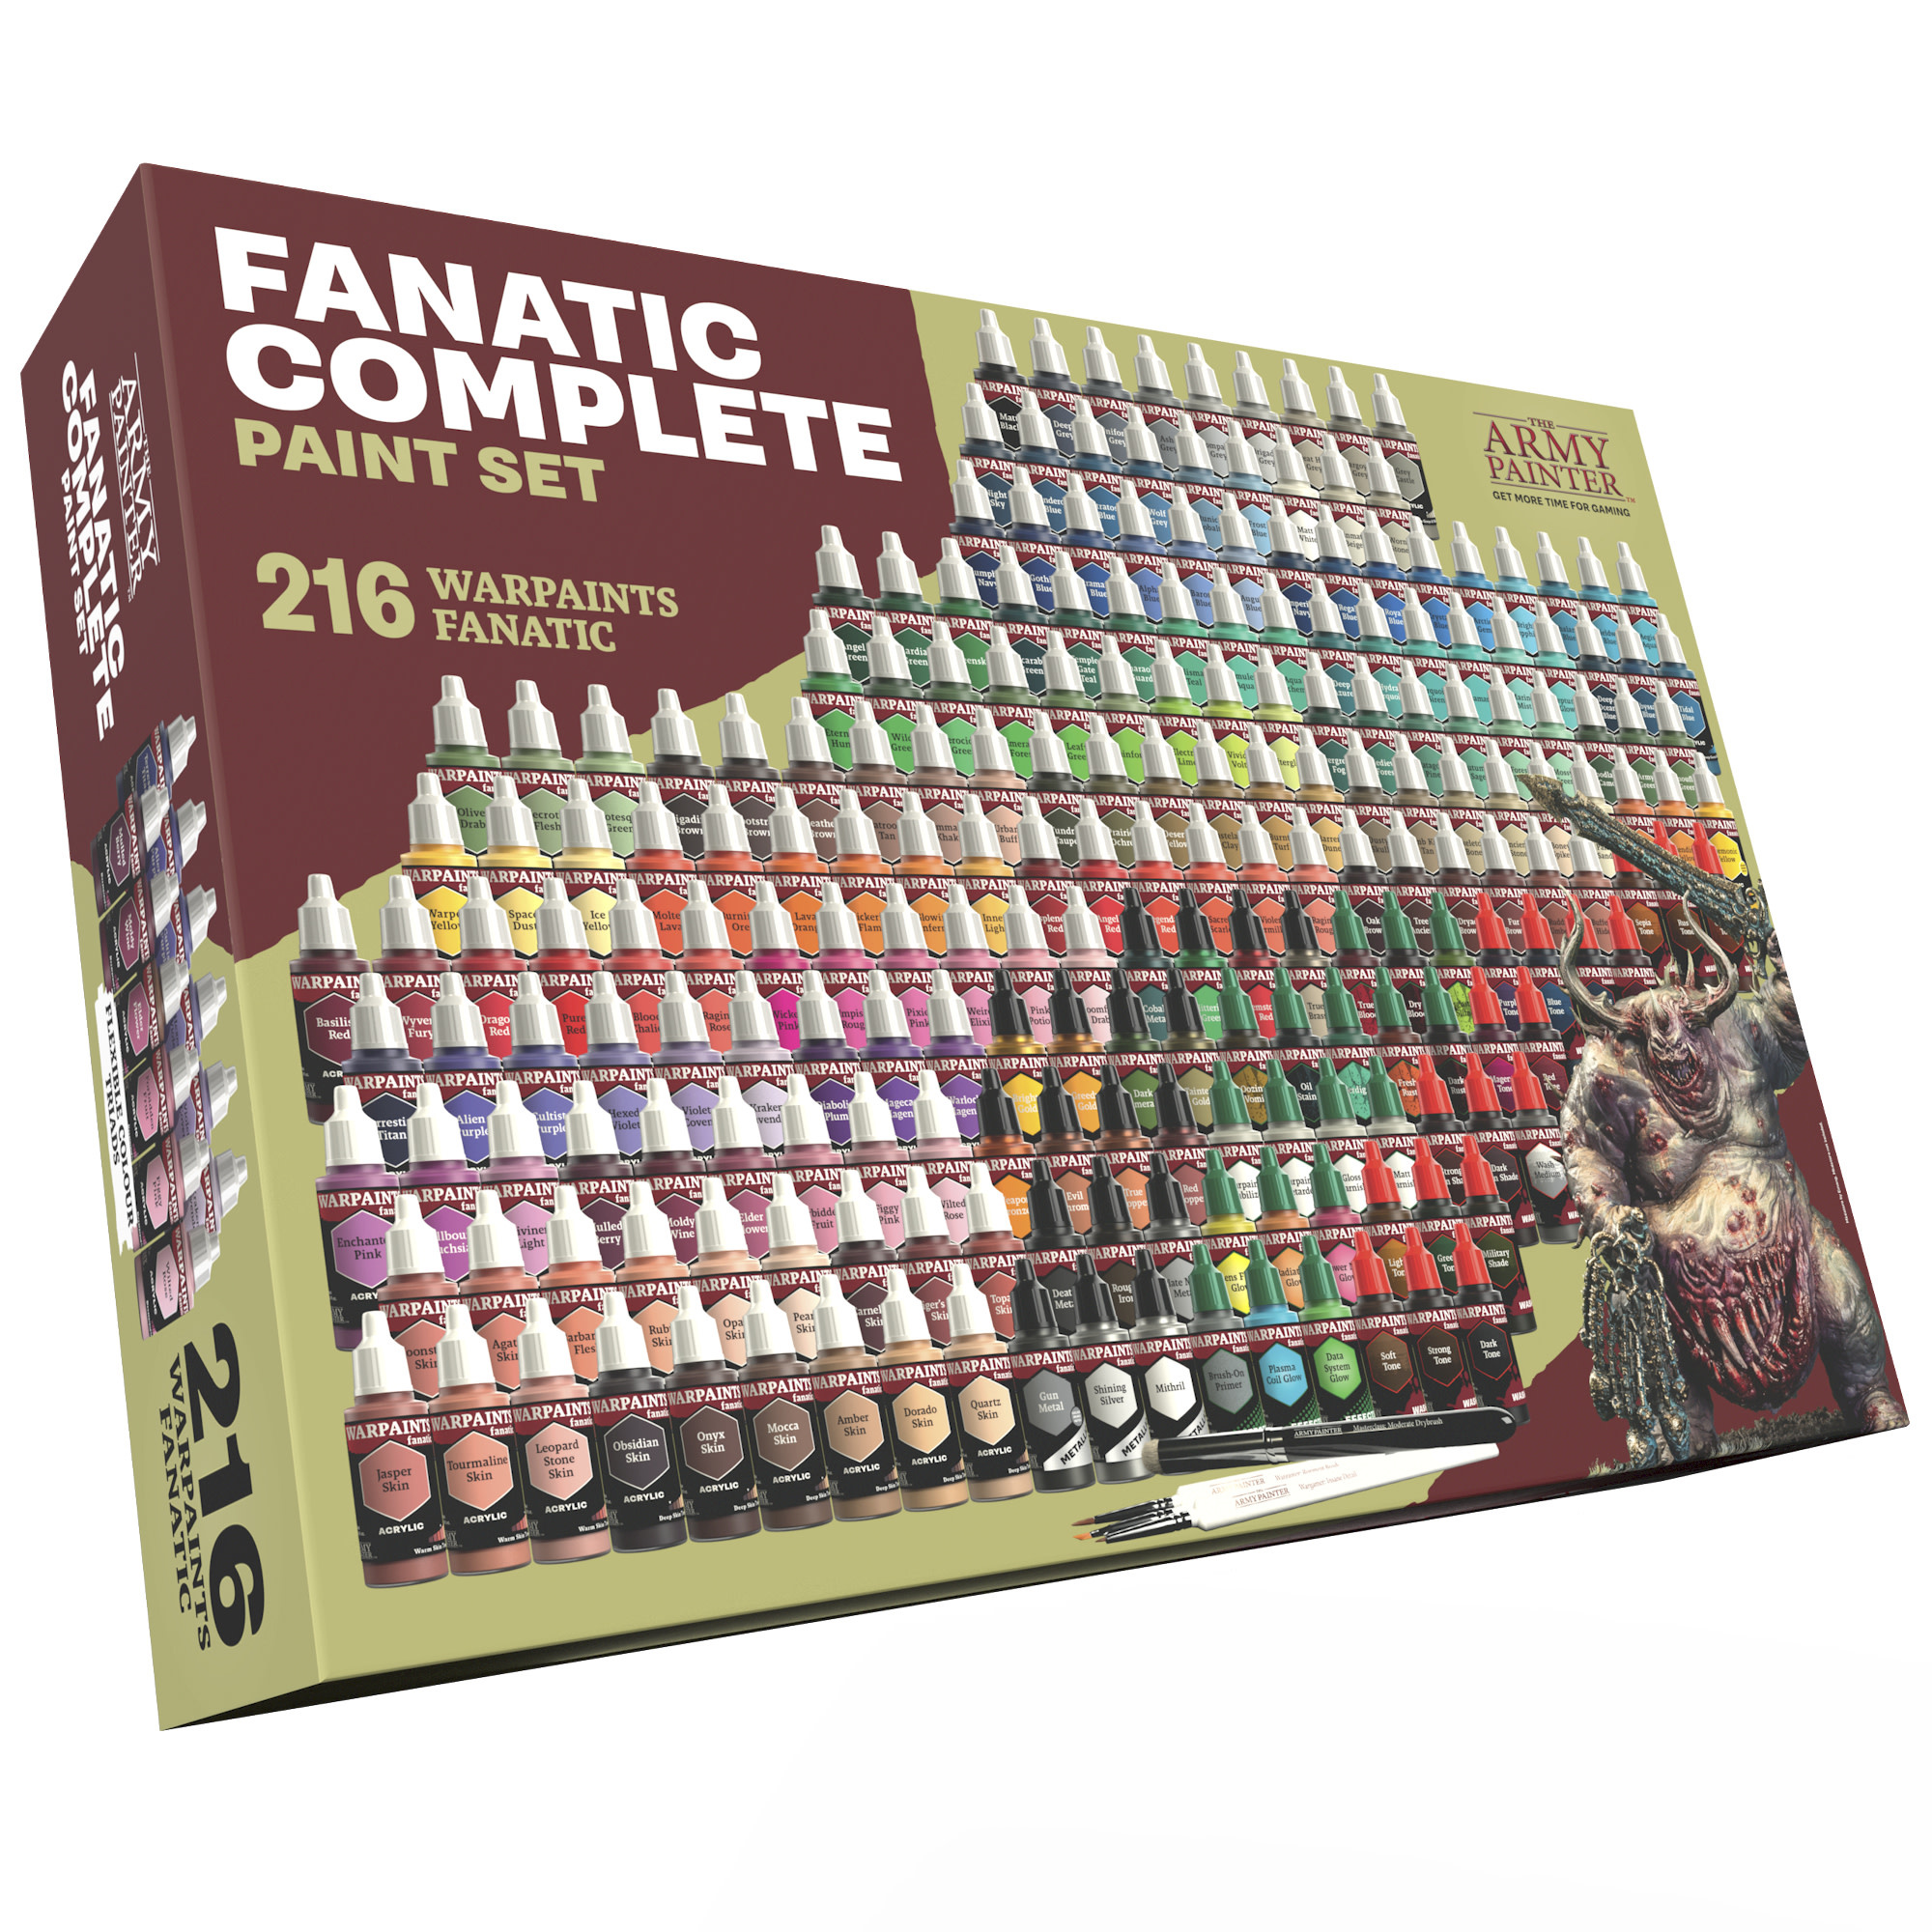 Review: Warpaints Fanatic by The Army Painter – best paints in the